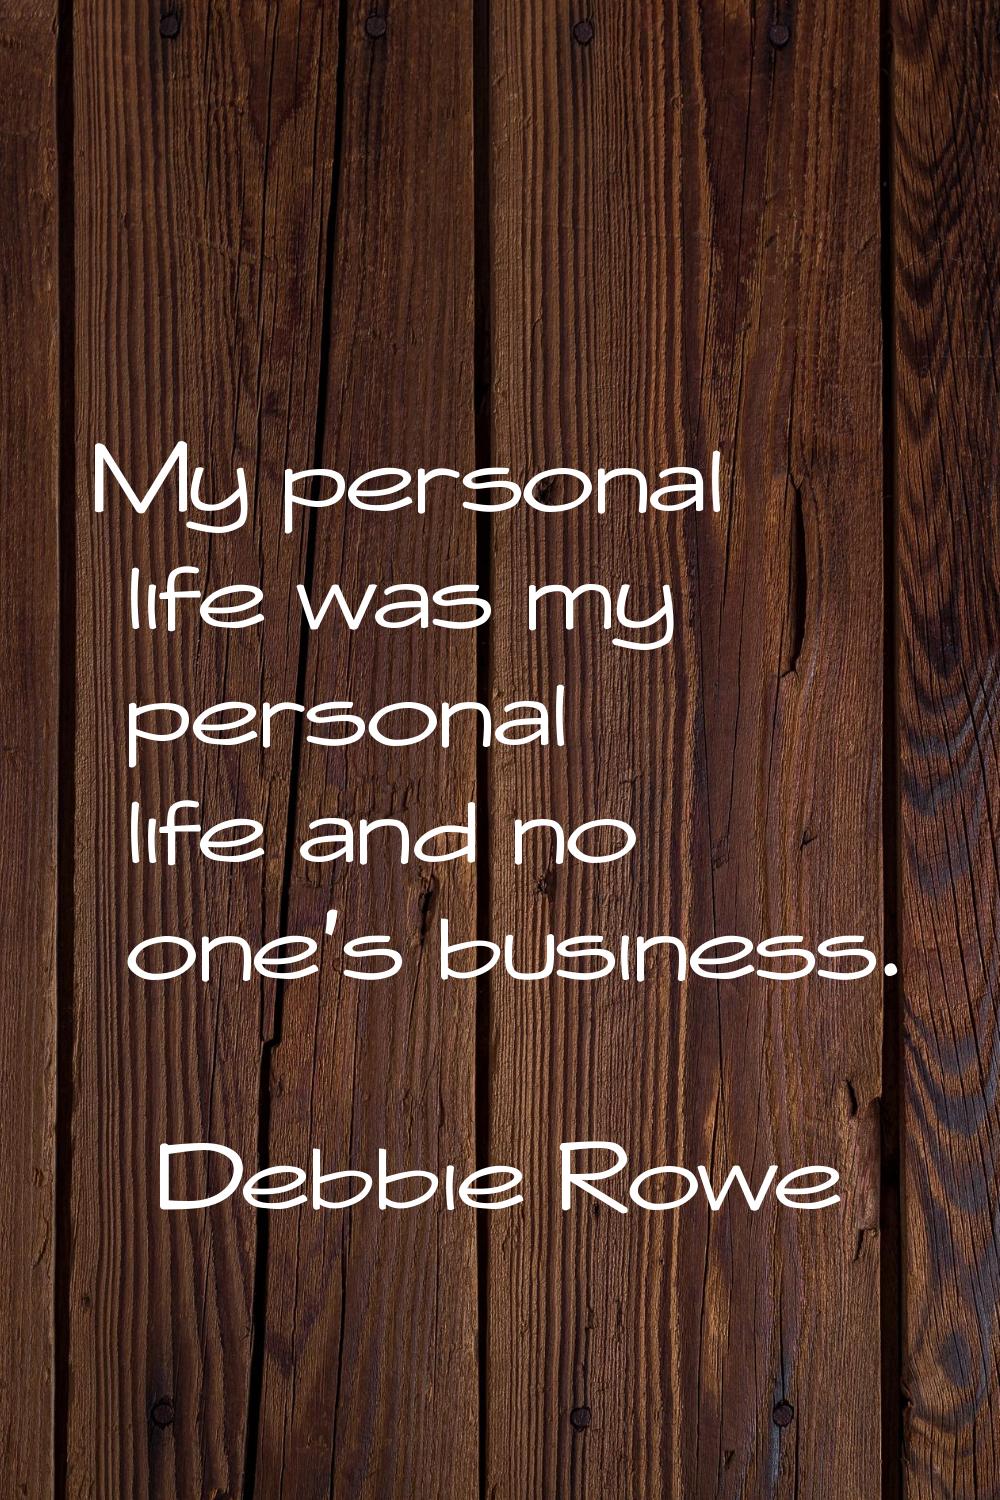 My personal life was my personal life and no one's business.